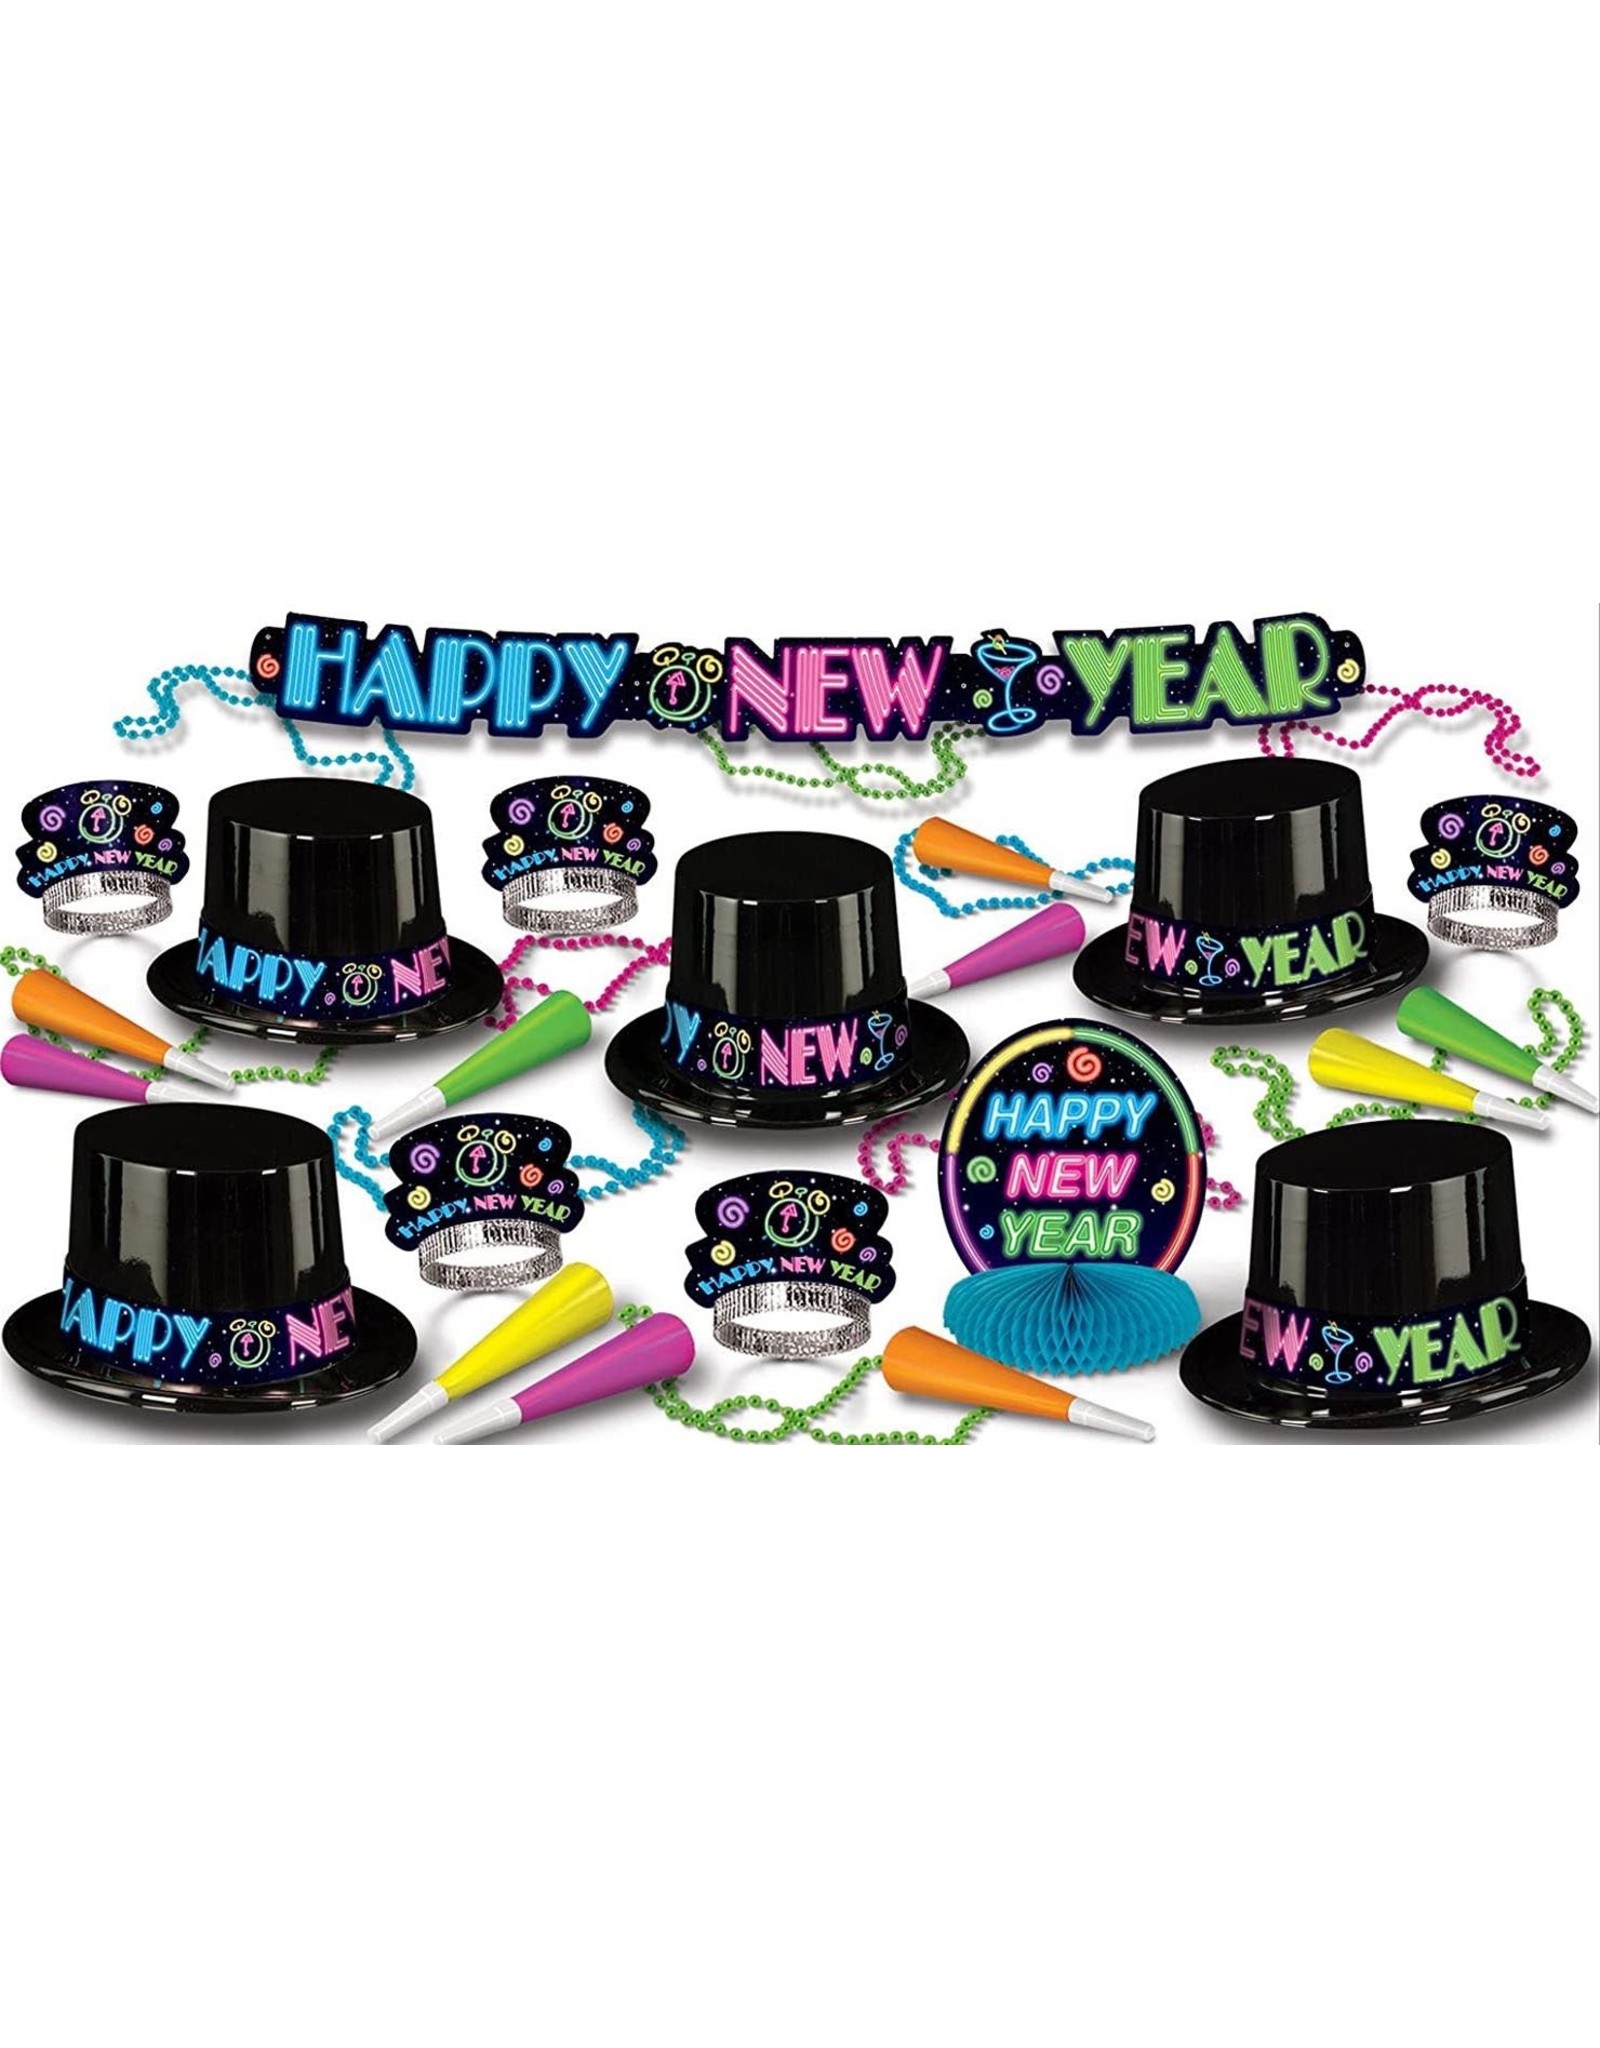 Beistle Neon Happy New Year Party Supplies Set For 10 People